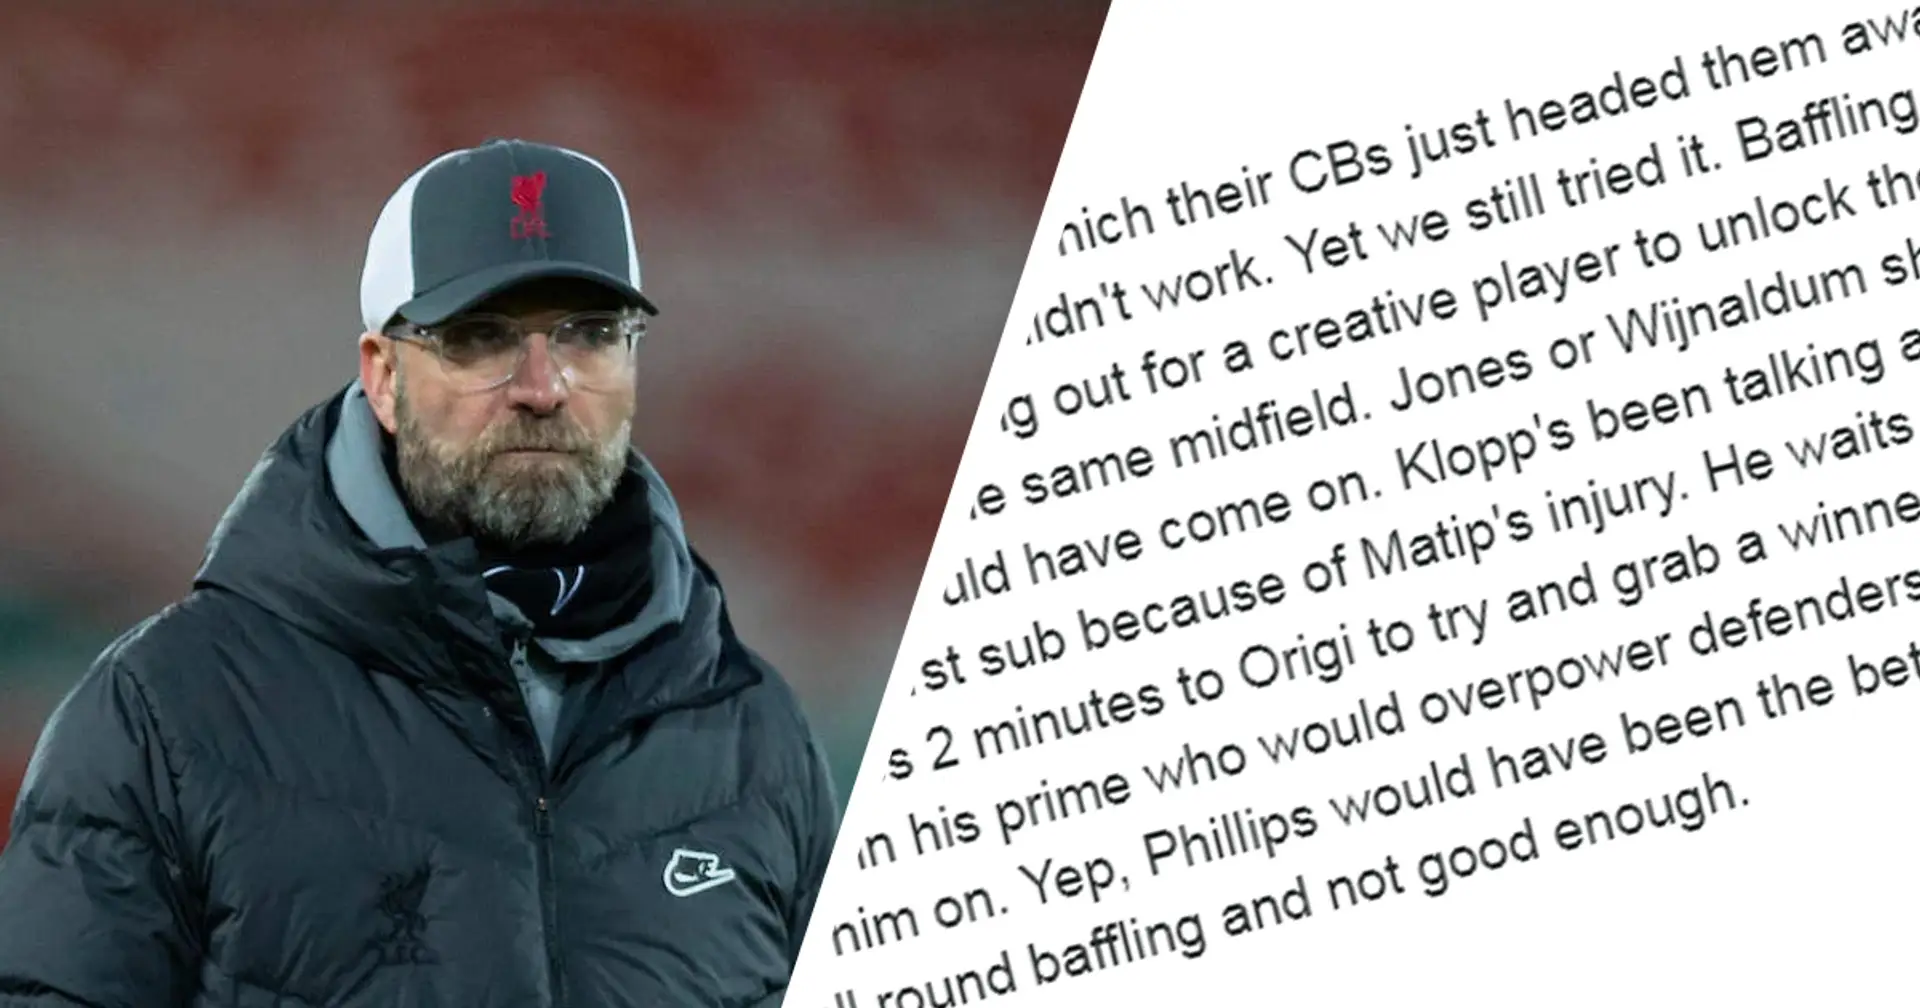 'The game was crying out for a creative player to unlock the defence': fan slams Klopp for poor selection choices in West Brom draw